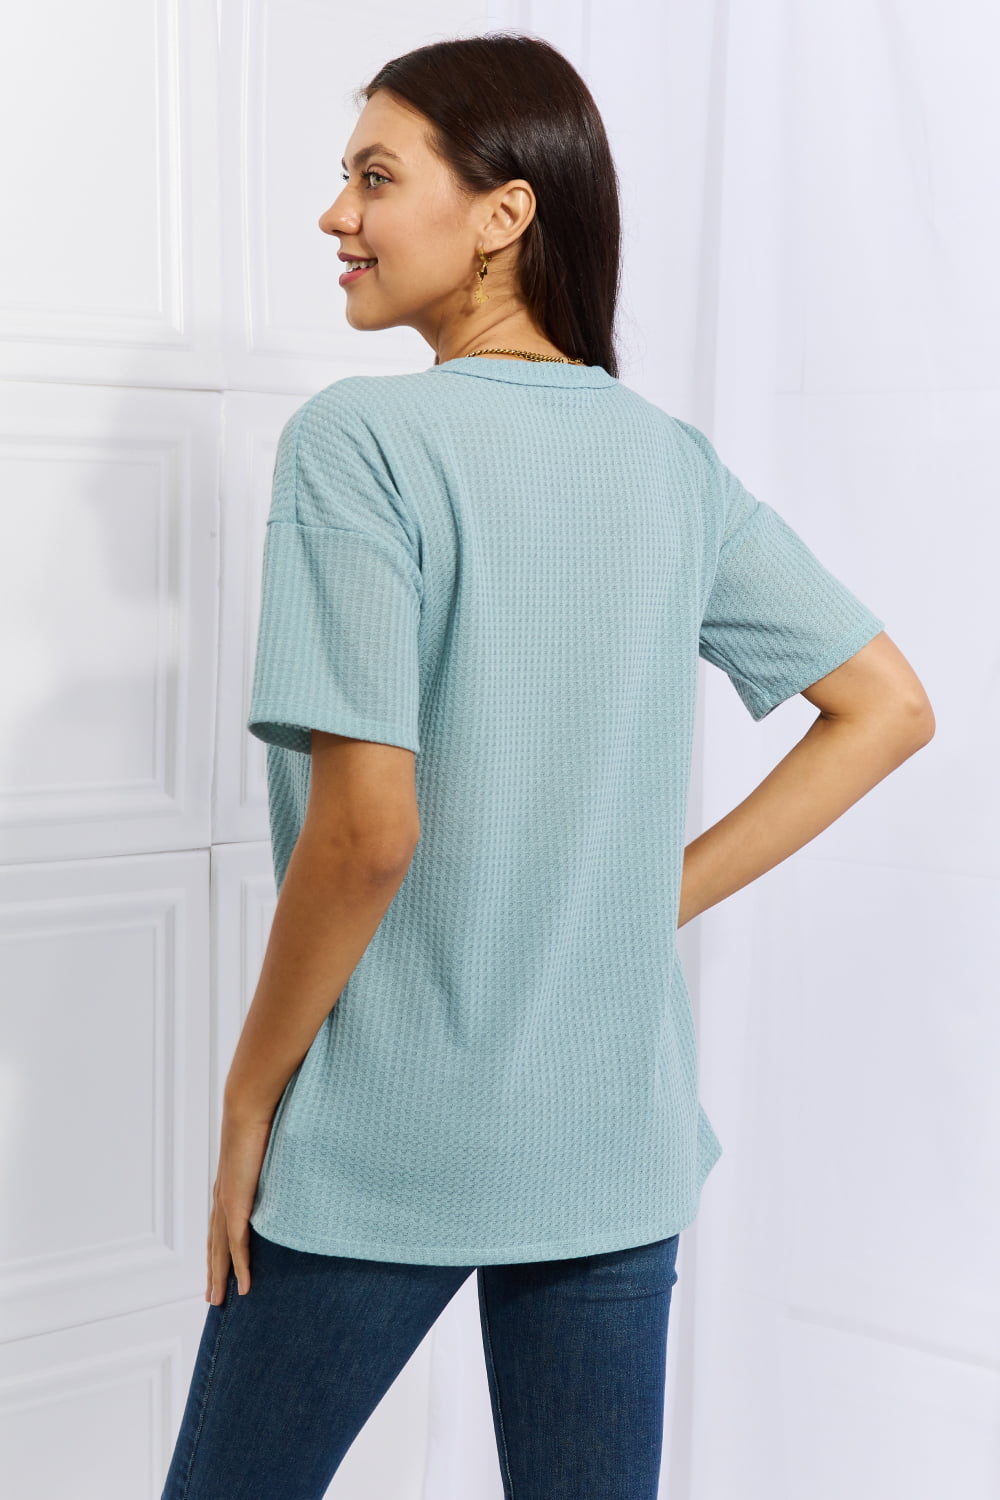 Made For You Waffle Top in Blue